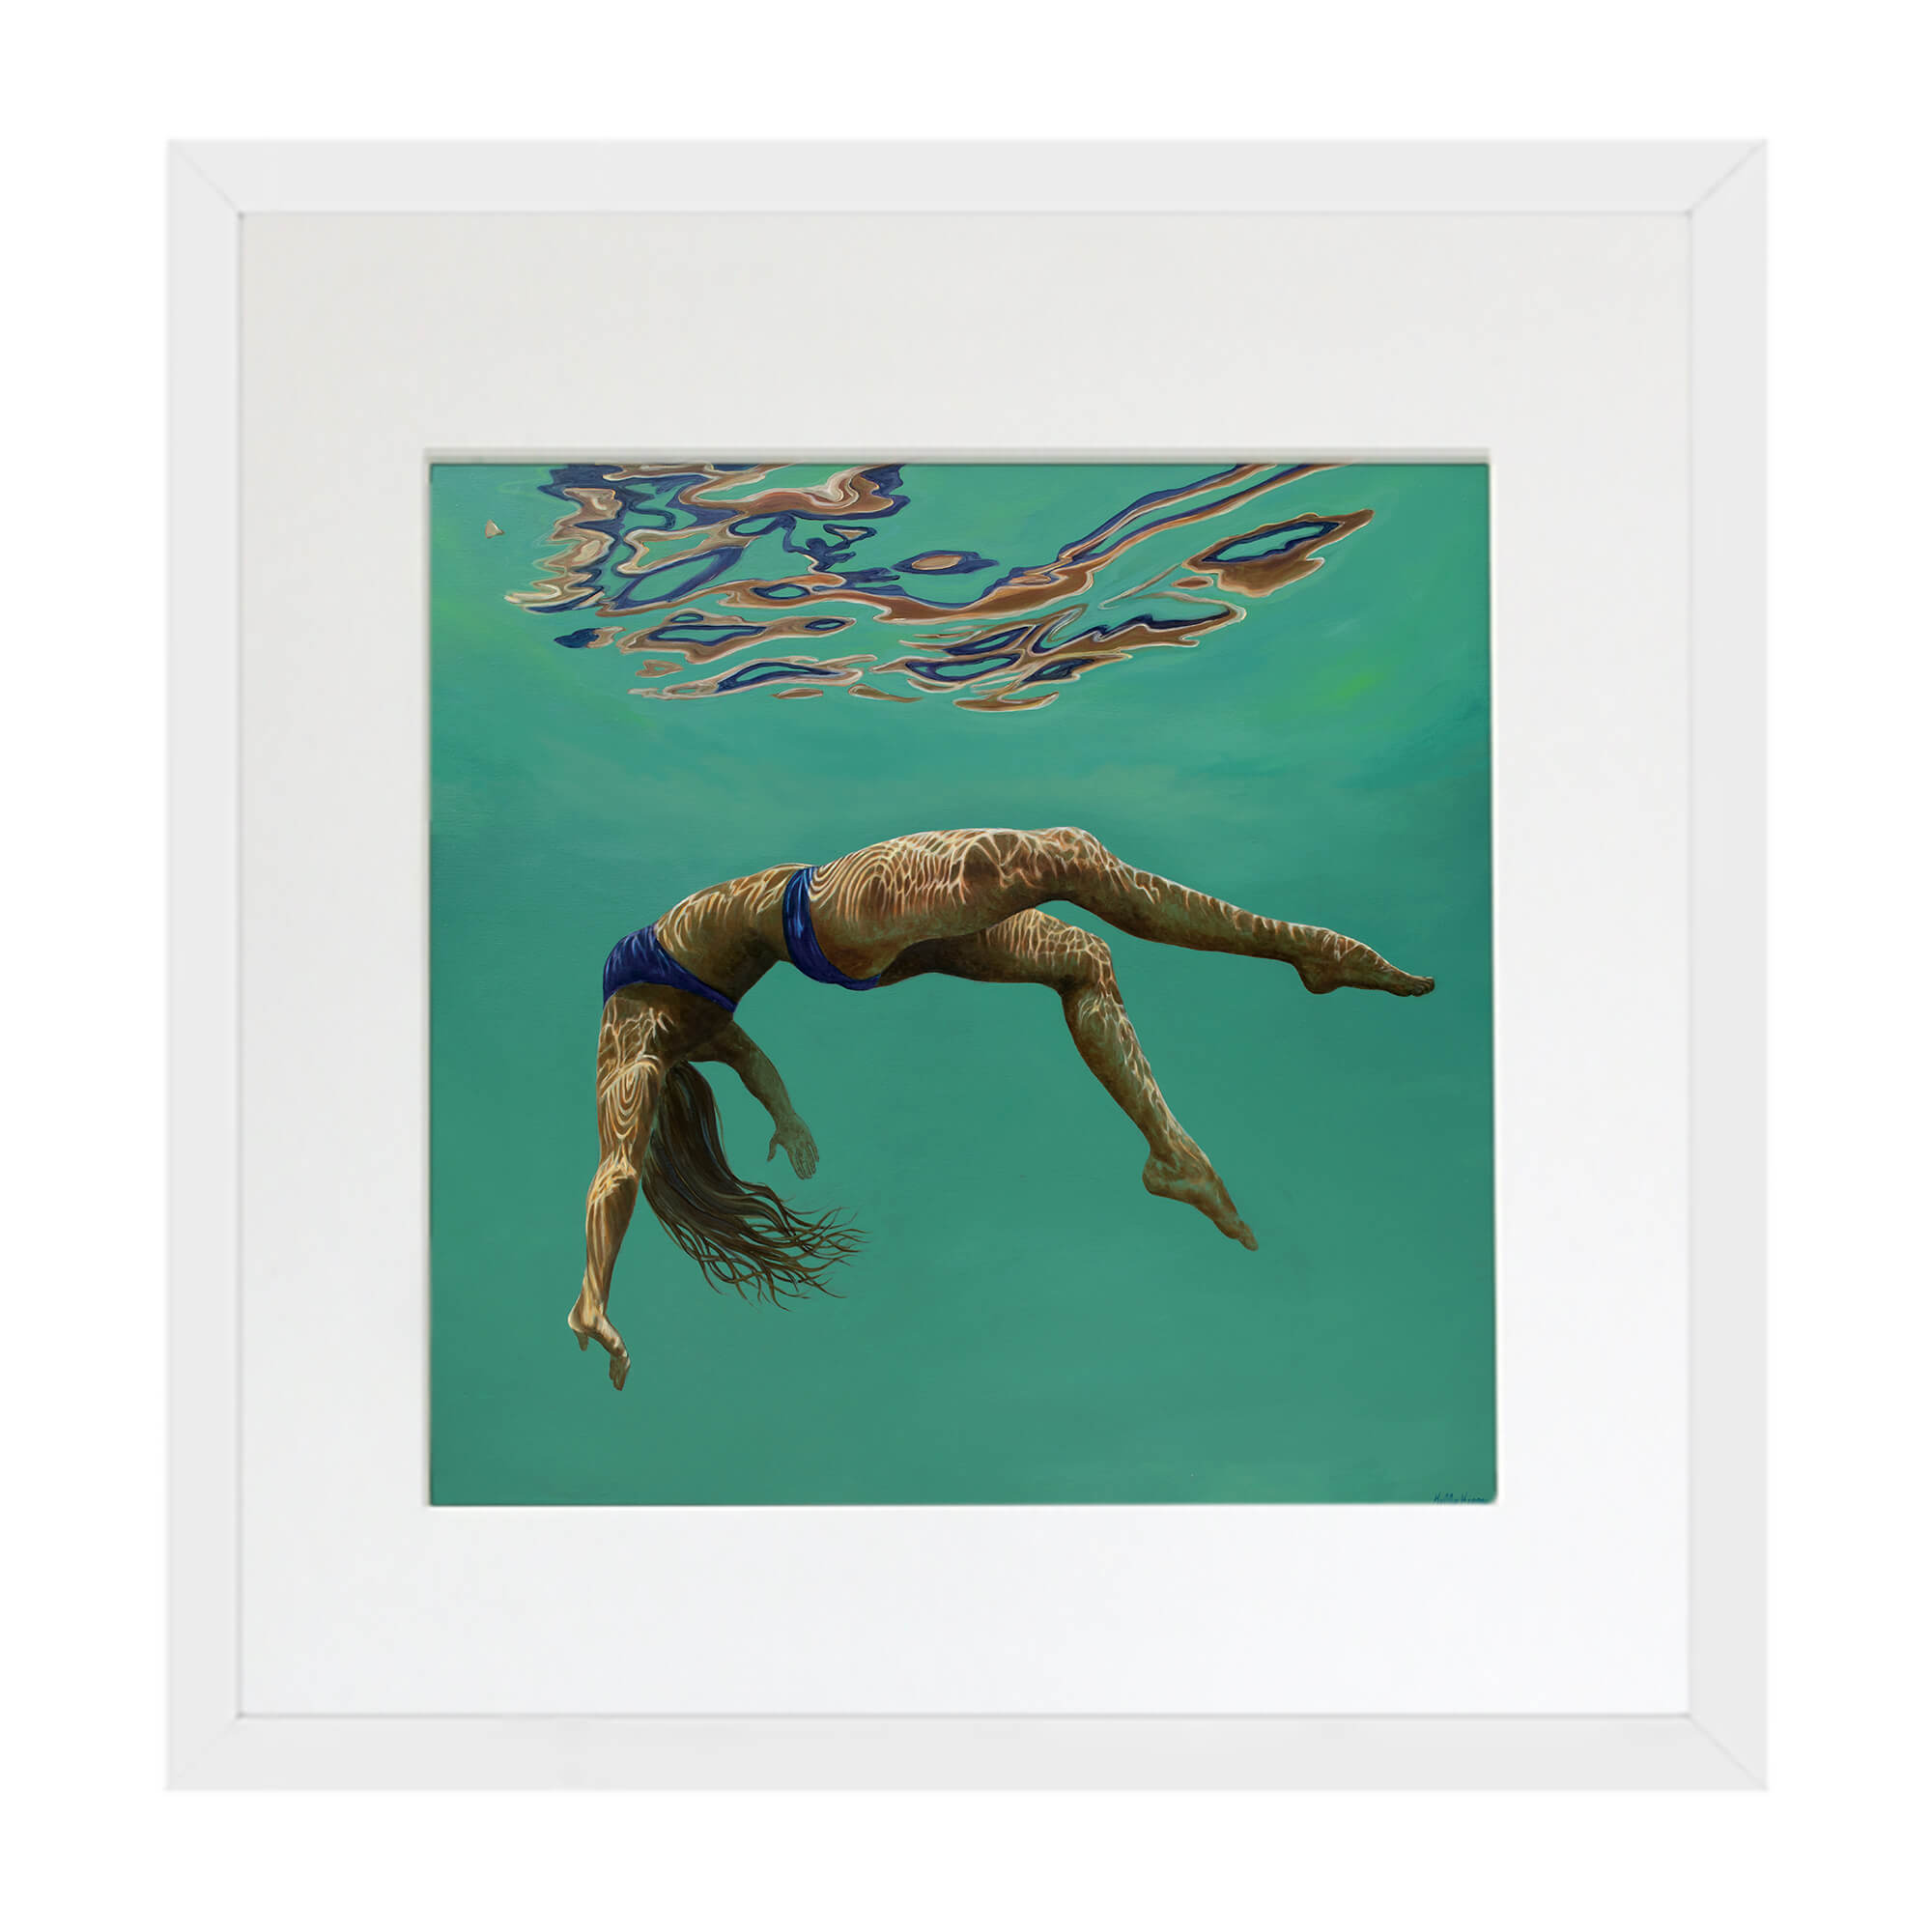 Matted art print of a woman underwater near the surface by Hawaii artist Kelly Keane